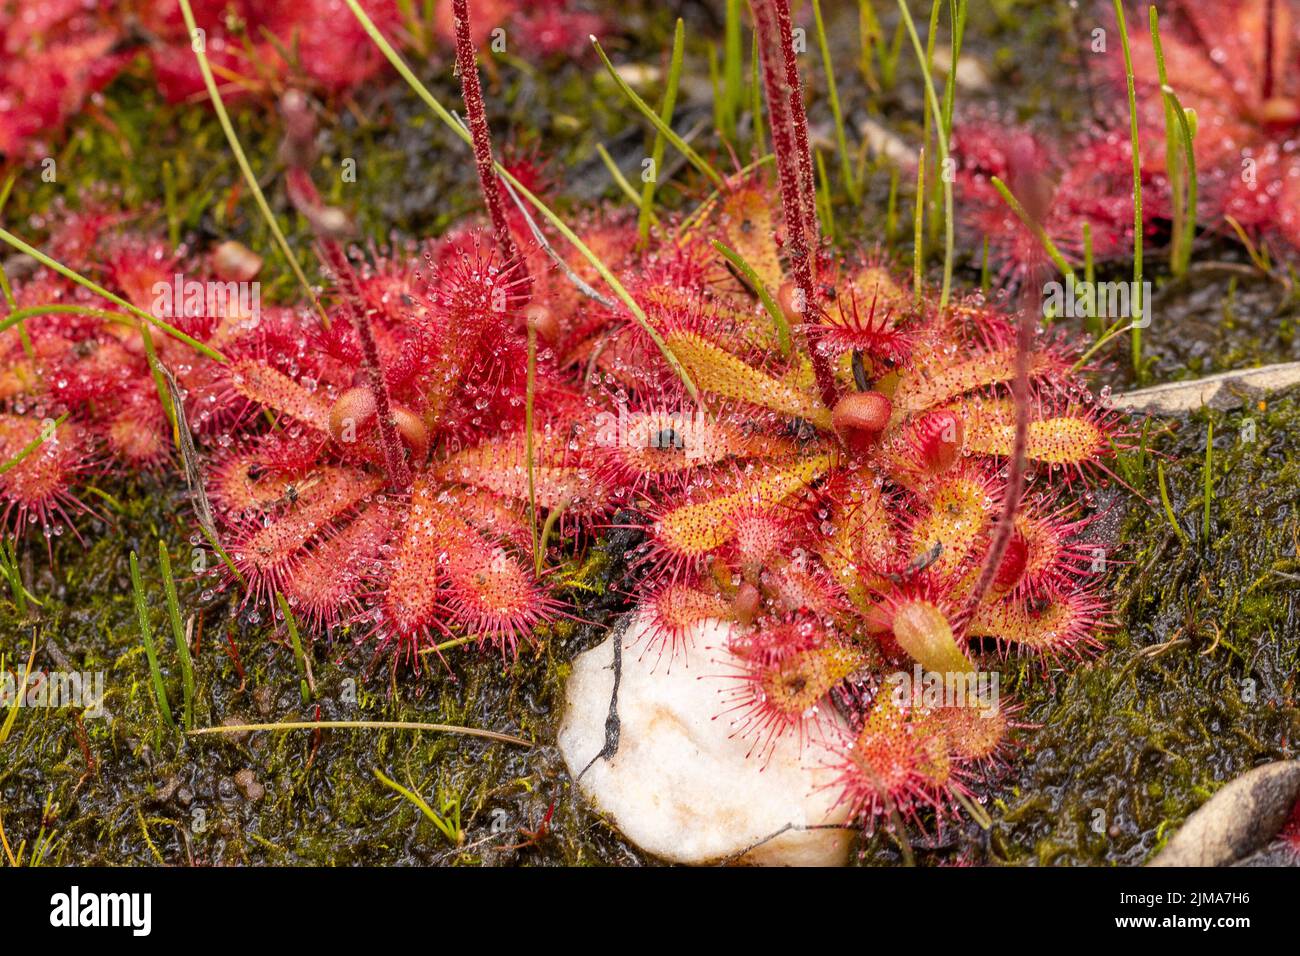 Close-up of a red rosetted sundew species (Drosera sp.) taken in natural habitat on the Bokkeveld Plateau in the northern Cape of South Africa Stock Photo